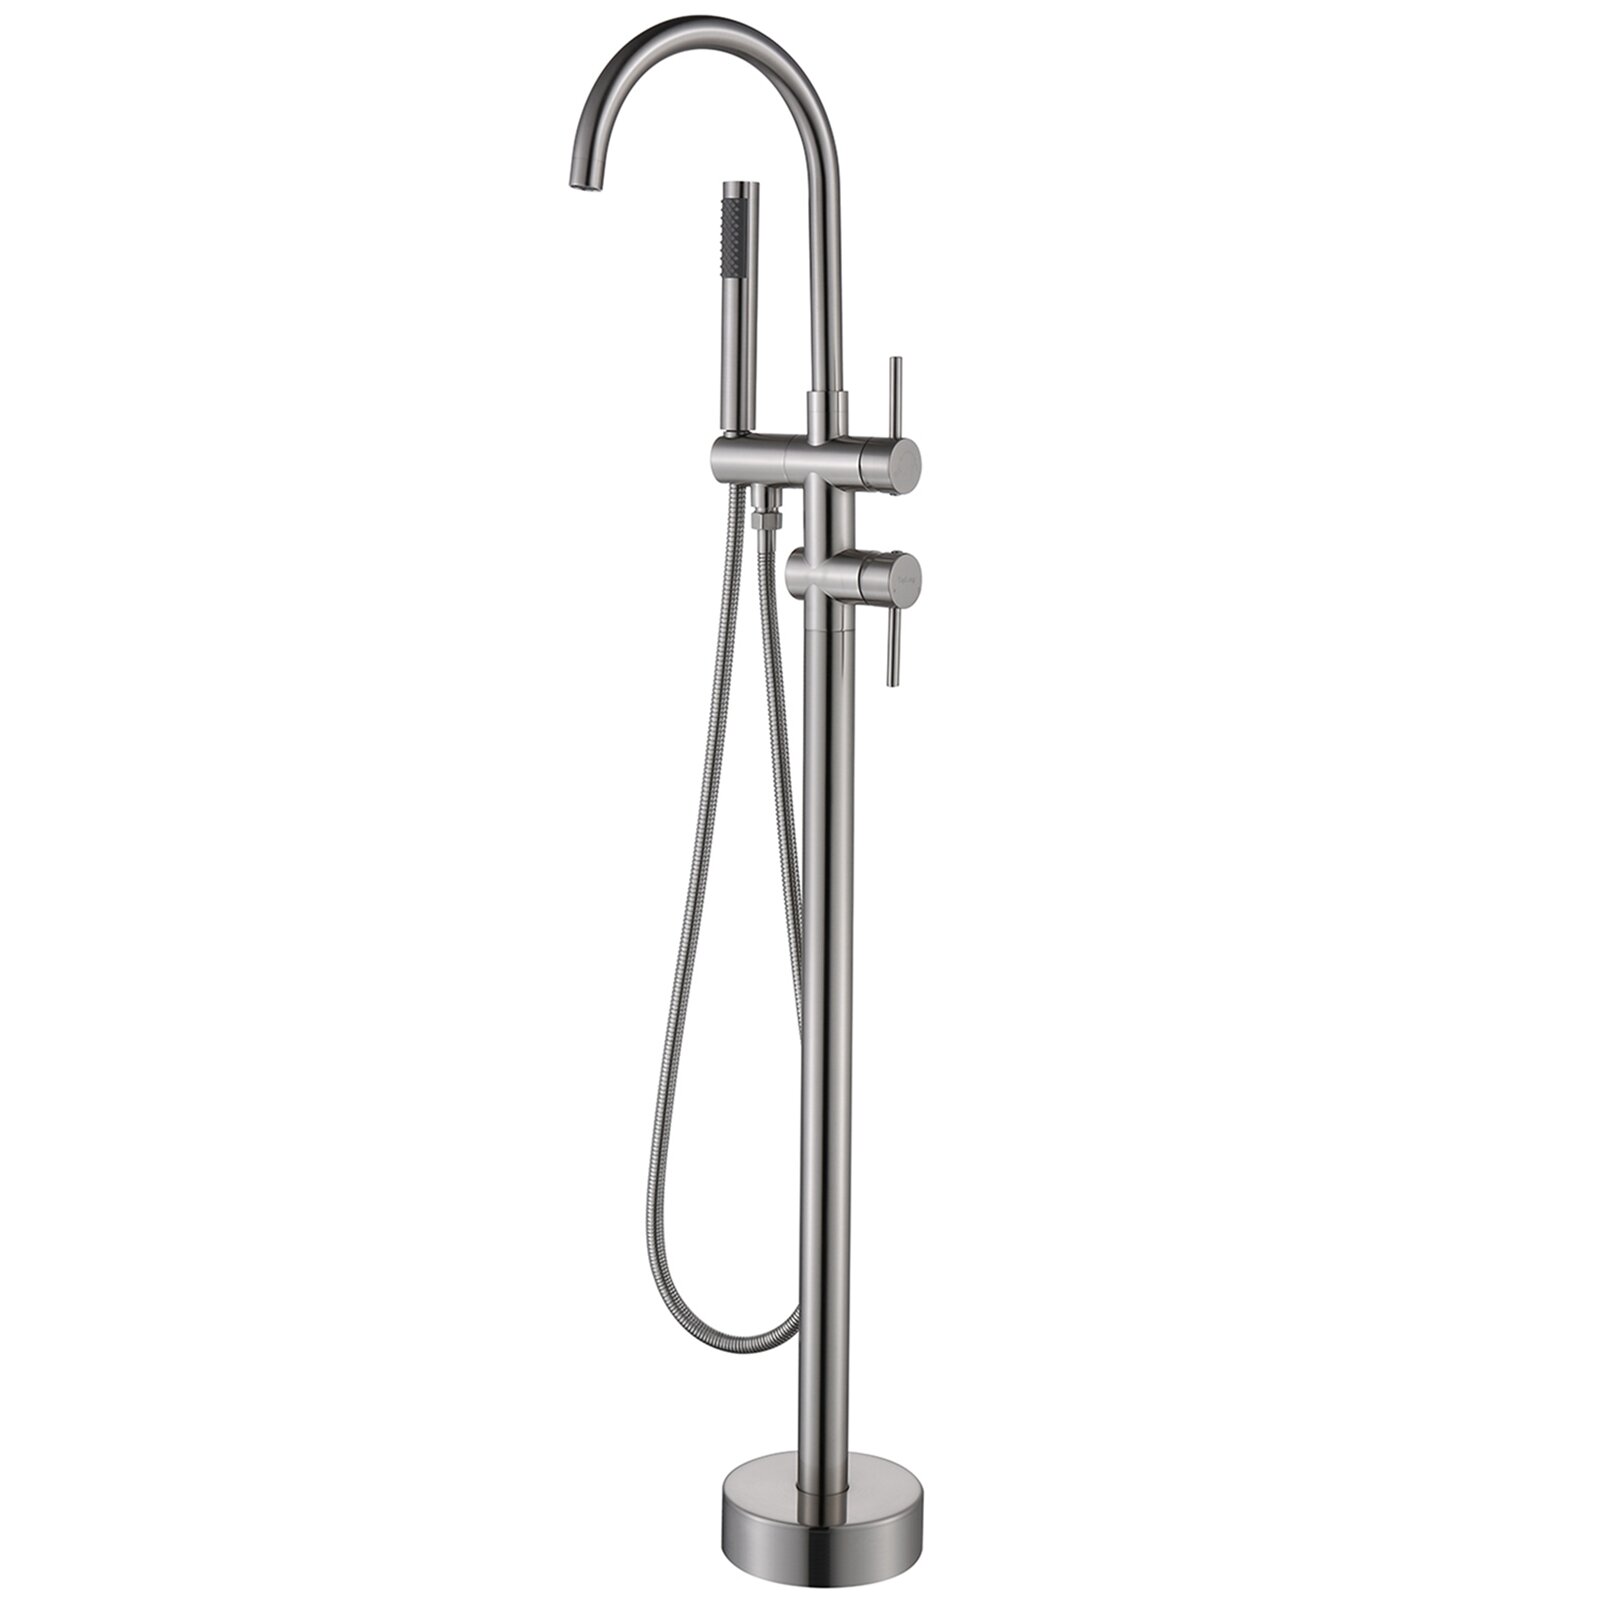 Free Standing Claw-foot Bathtub Faucet Floor Mounted Tub Filler Handheld Shower 